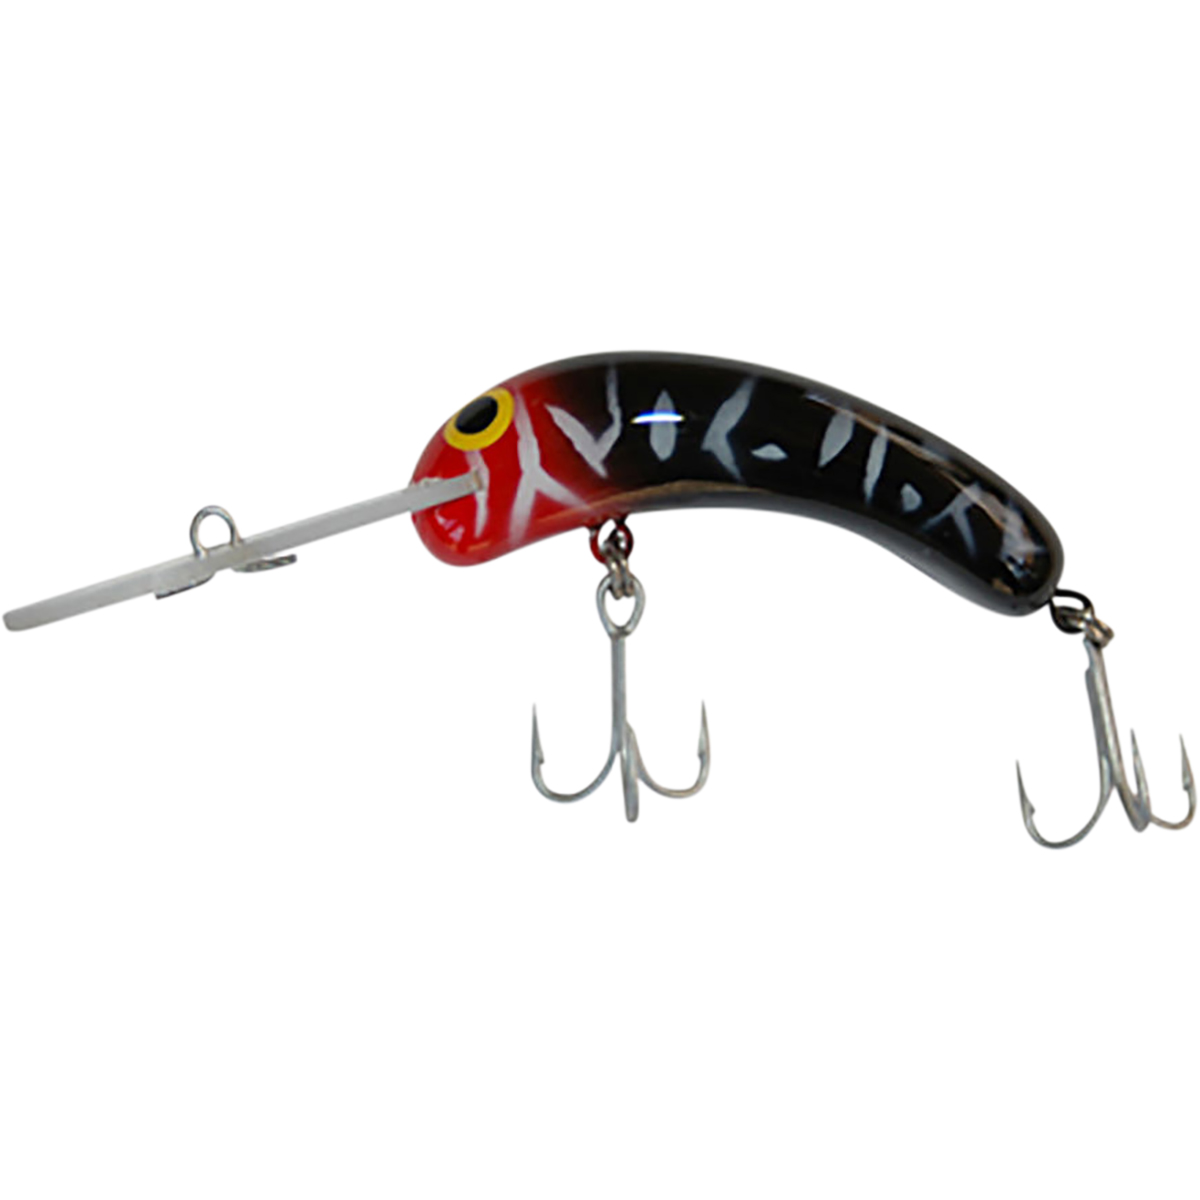 Australian Crafted Lures Invader Hard Body Lure 50mm Colour 24